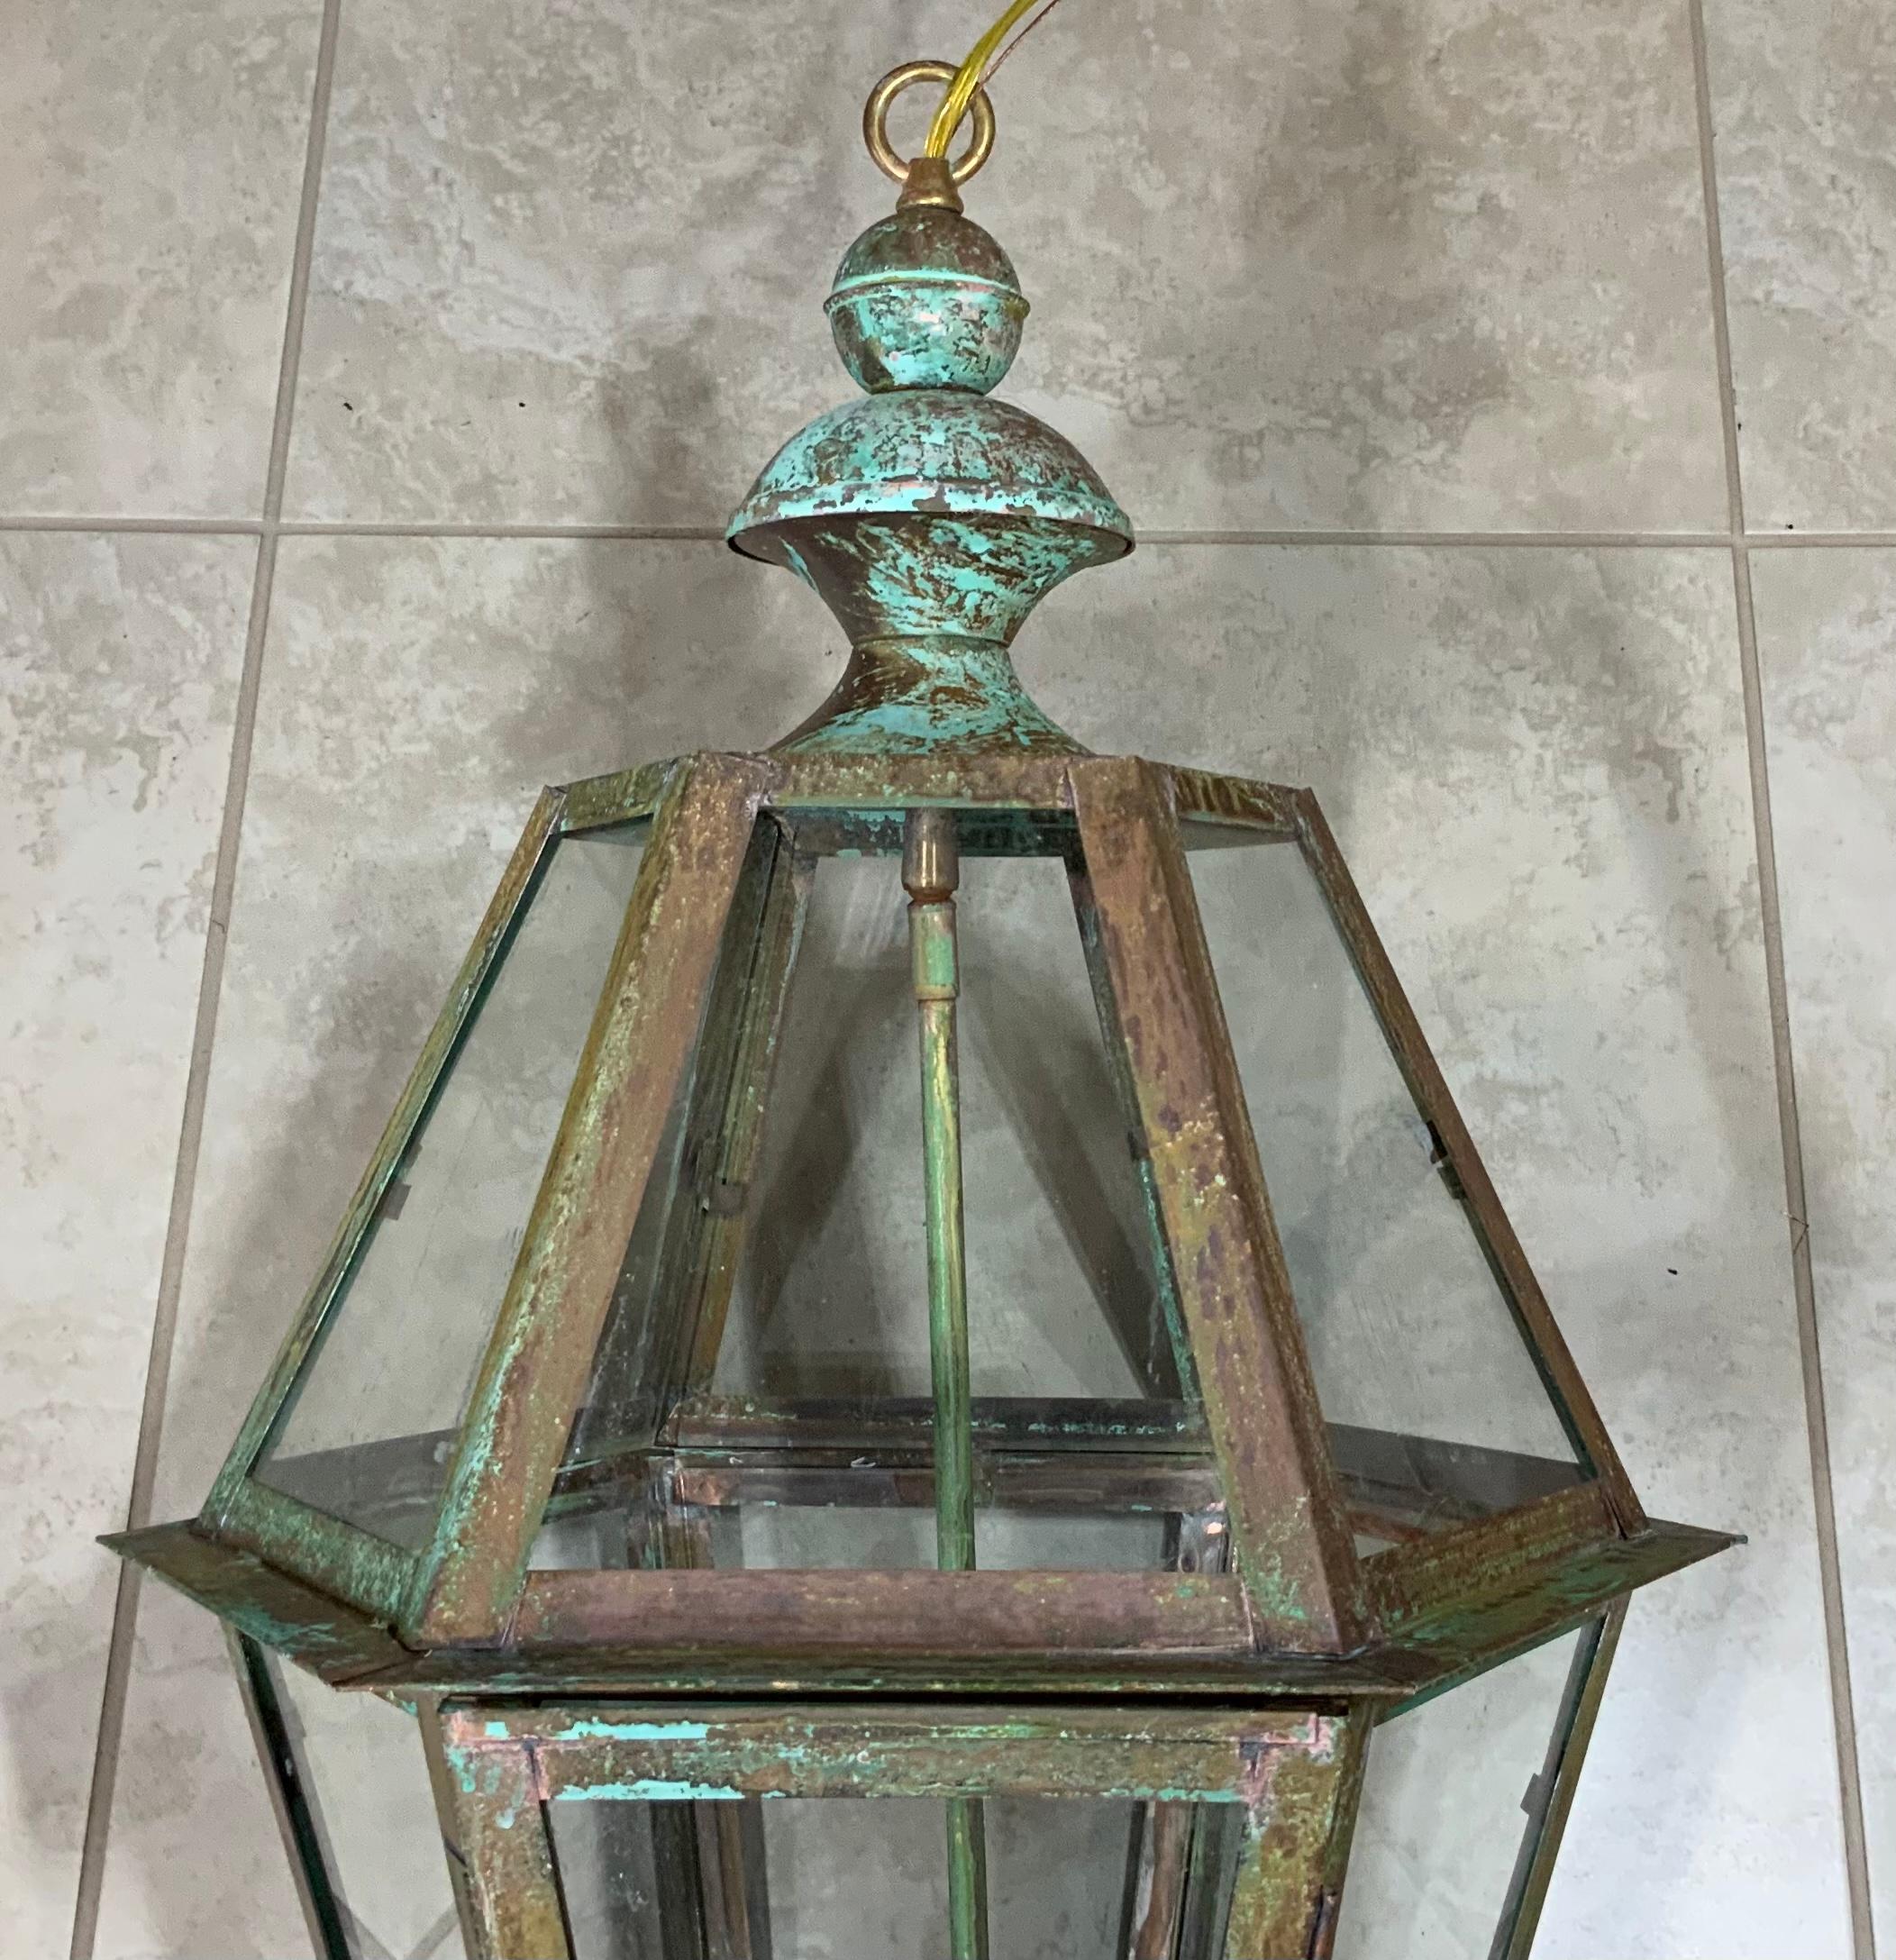 Exceptional six side hanging lantern made of handcrafted solid copper and brass stem with four 60/watt lights, weathered patina, suitable for wet location
Up to US code, UL approved, great look indoor outdoor. Copper canopy and chain included.